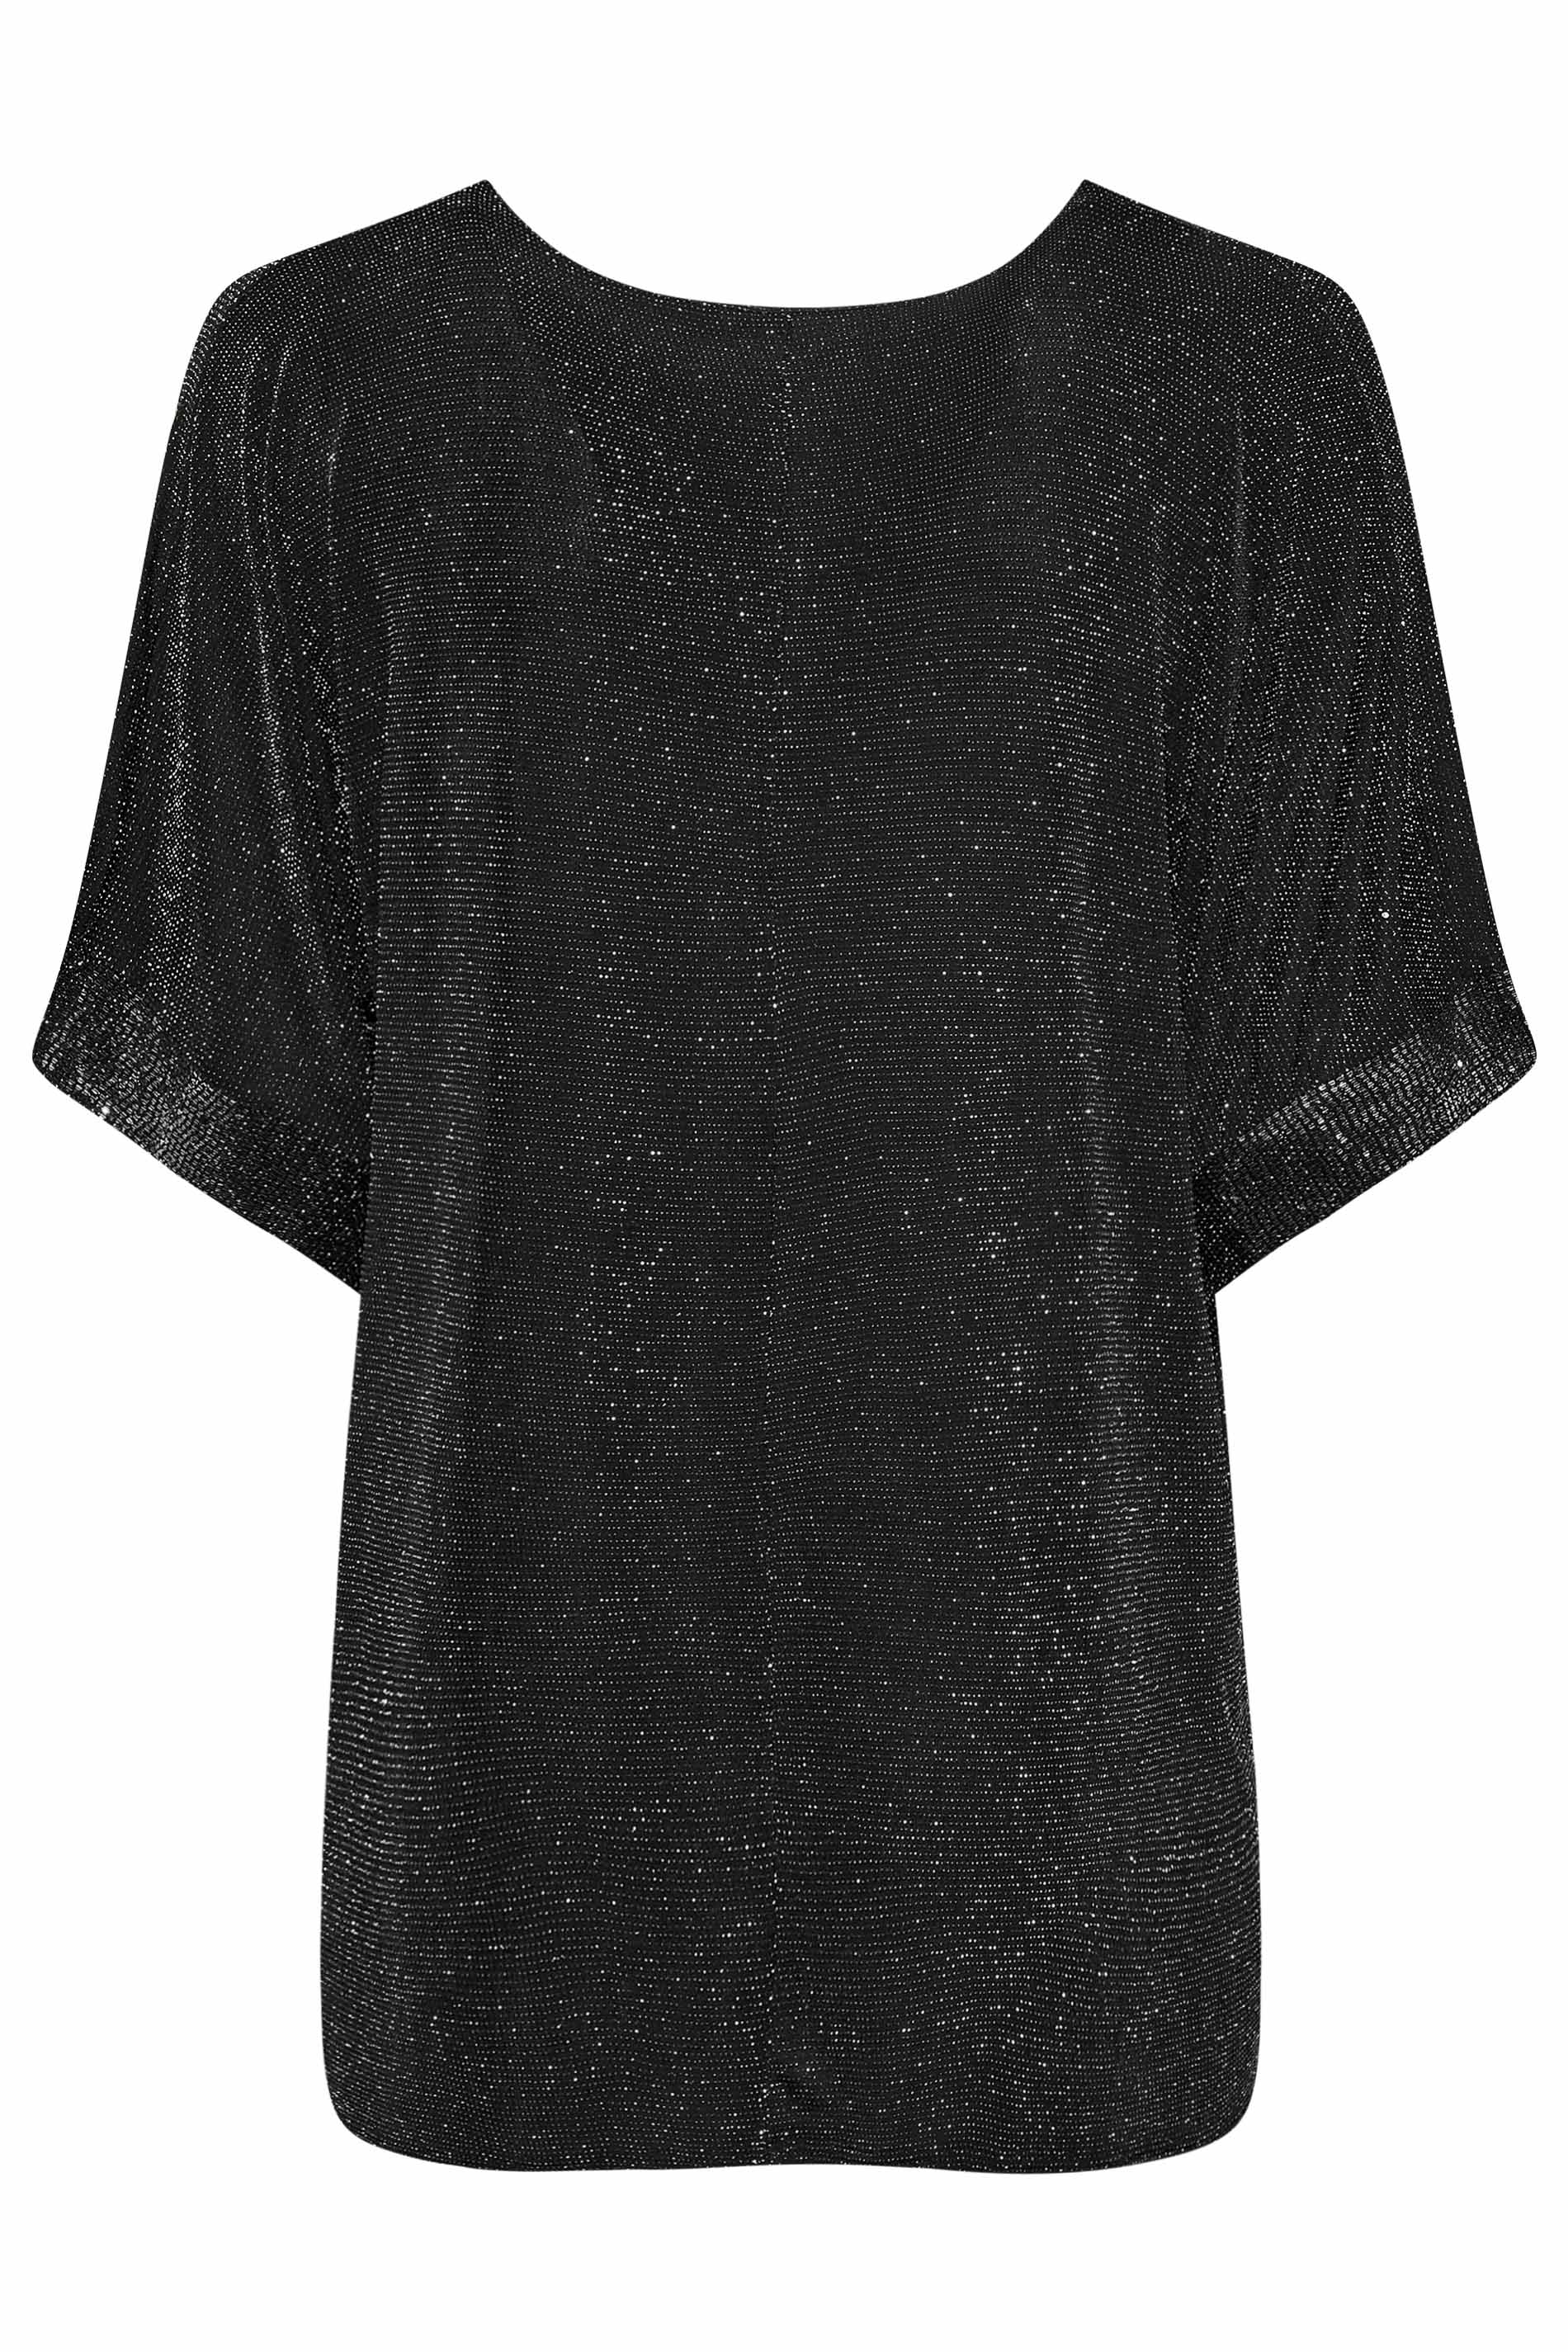 Yours Curve Plus Size New York Glitter Embossed Tshirt